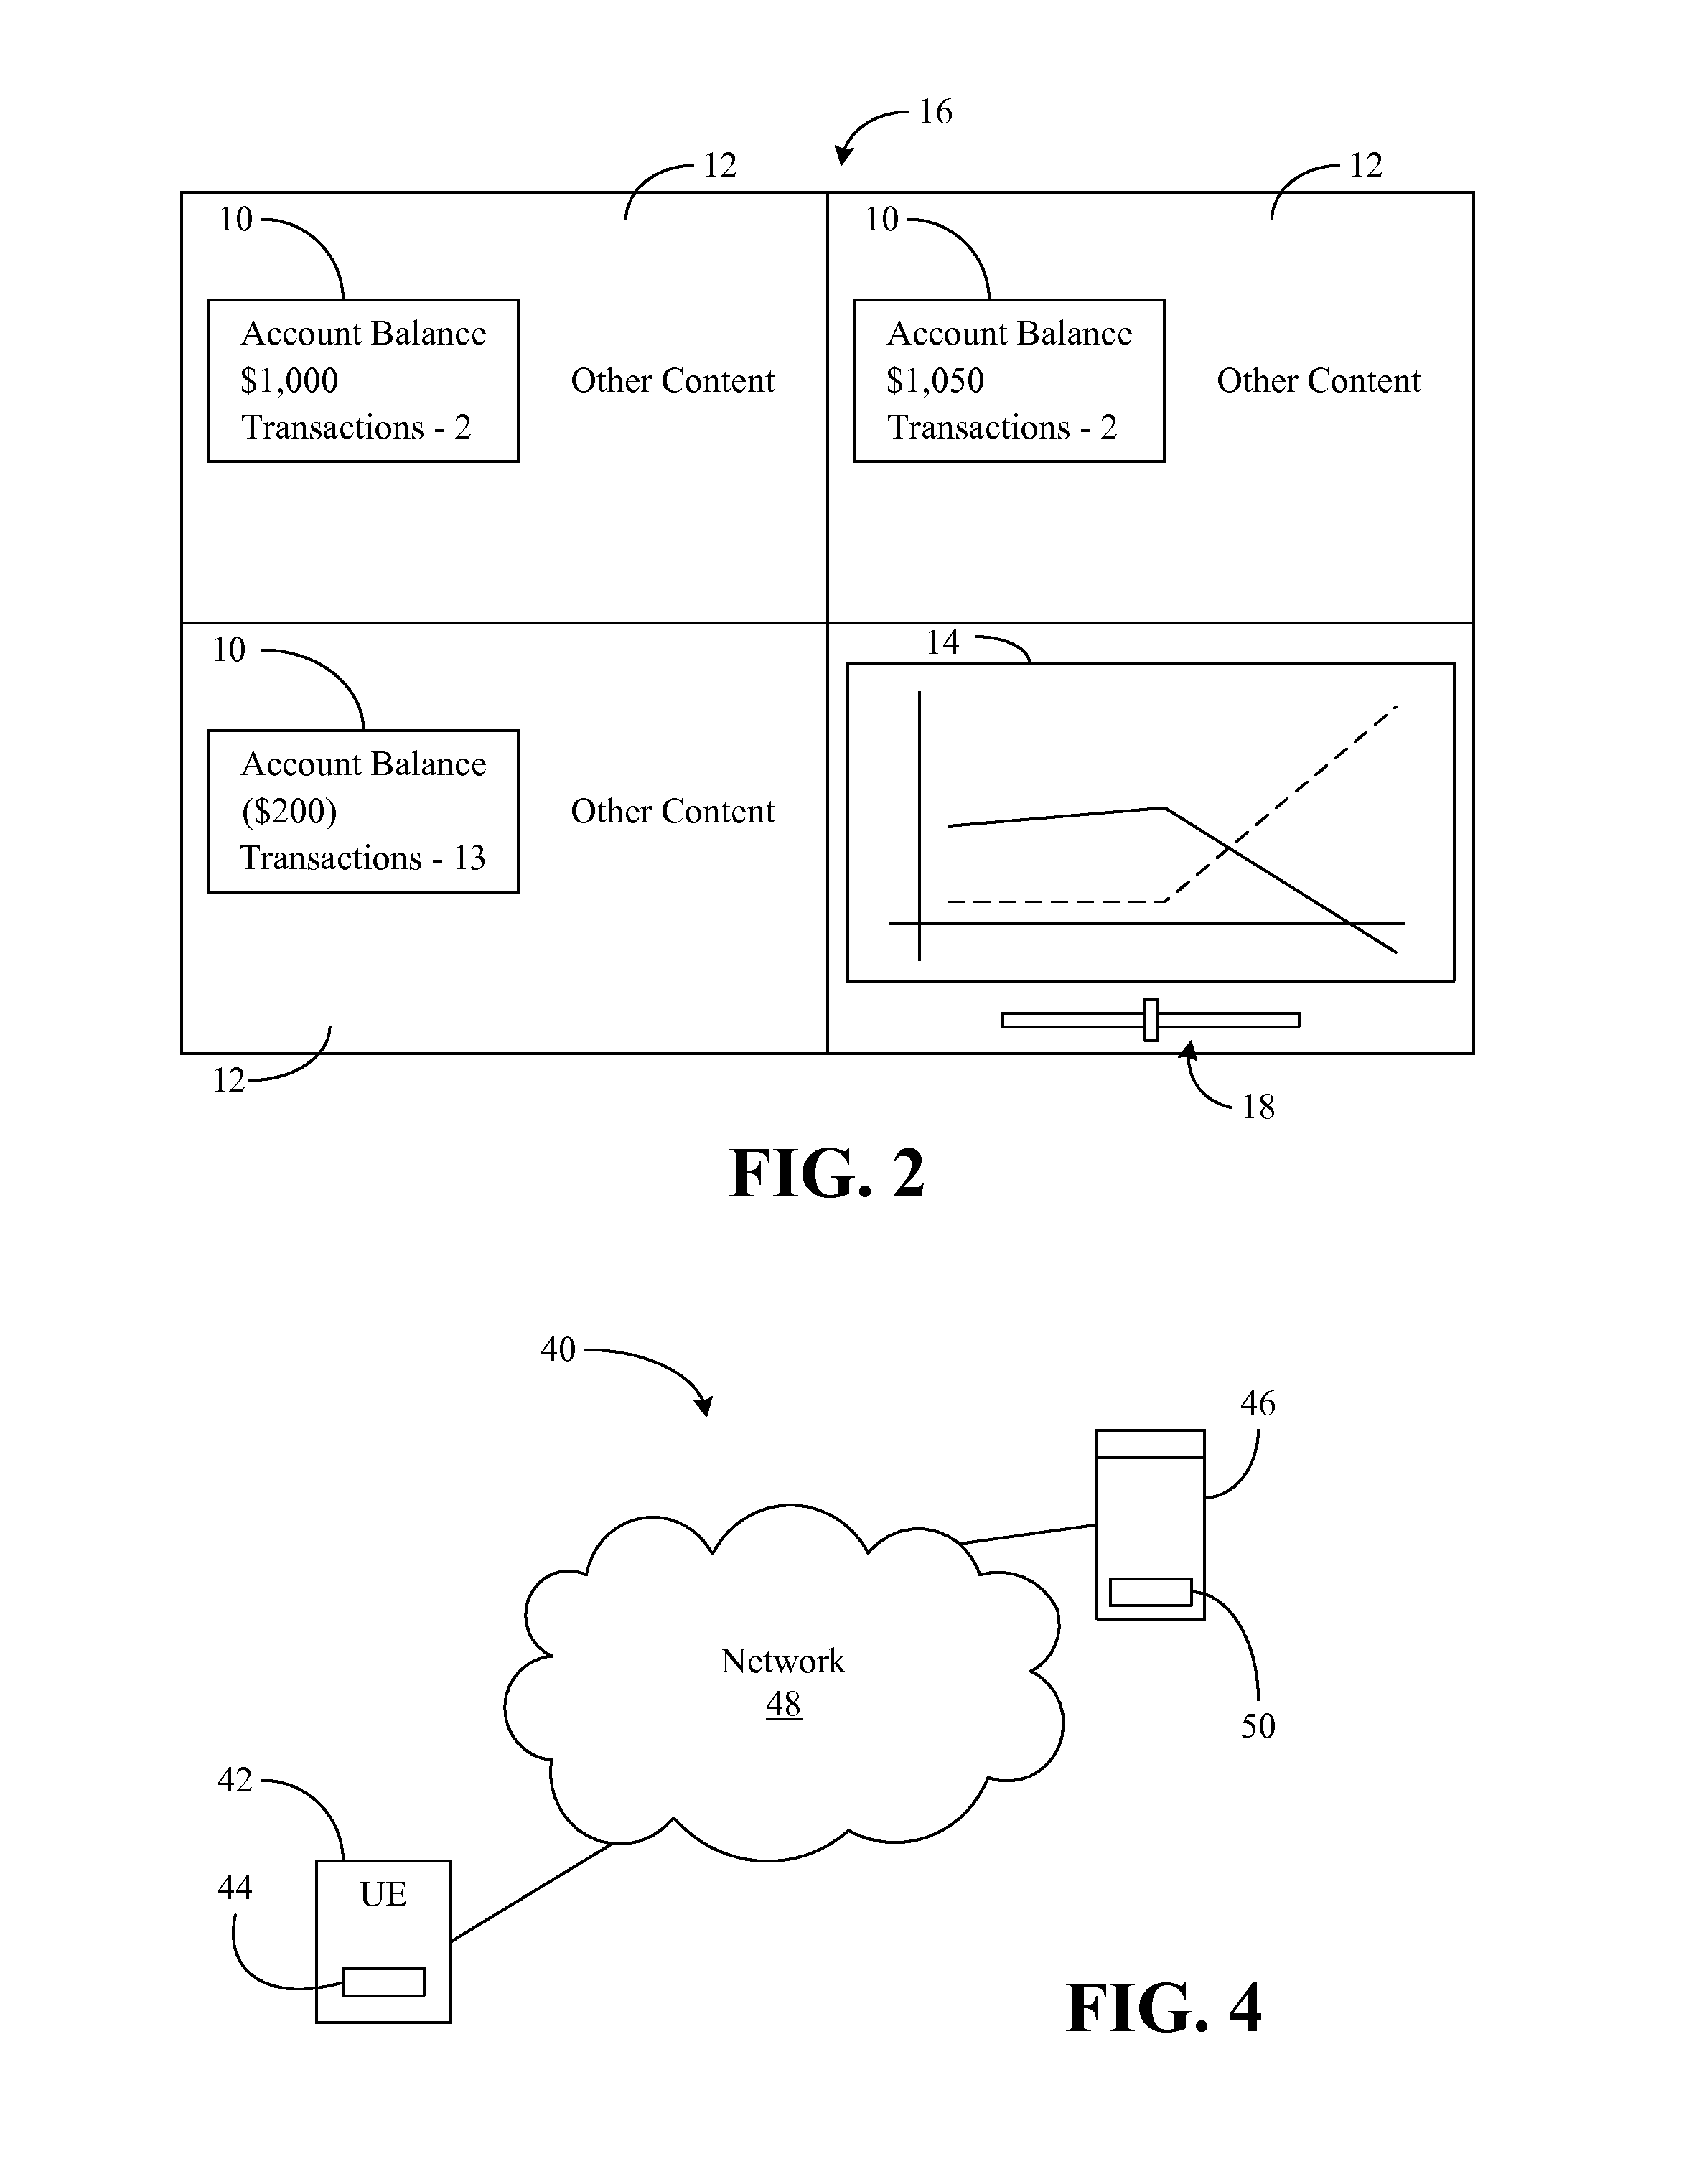 Displaying quantitative trending of pegged data from cache